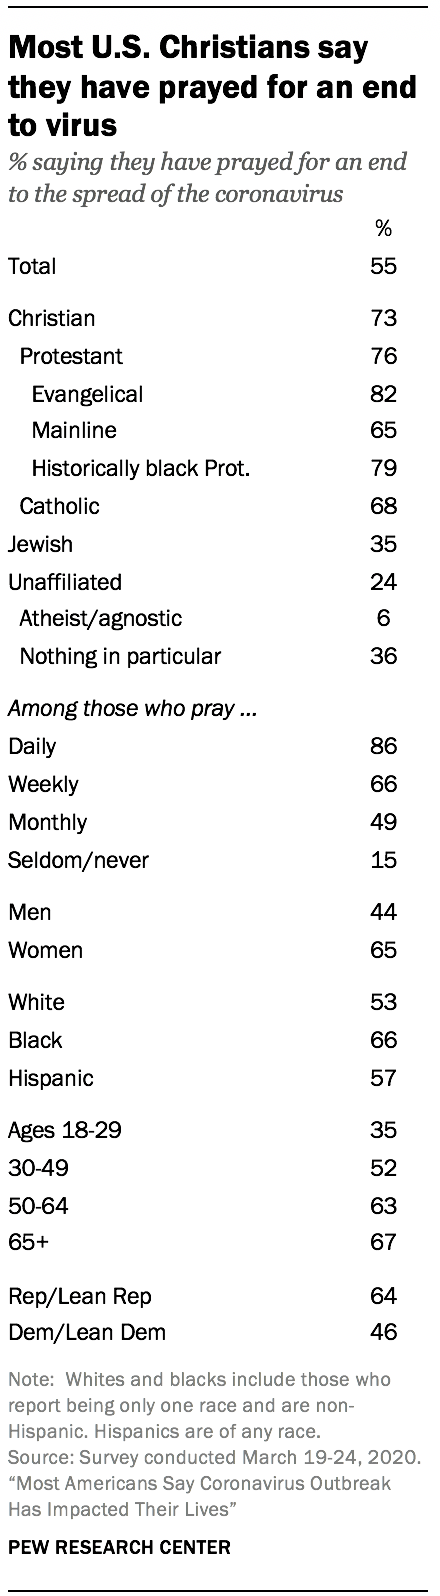 Most U.S. Christians say they have prayed for an end to virus